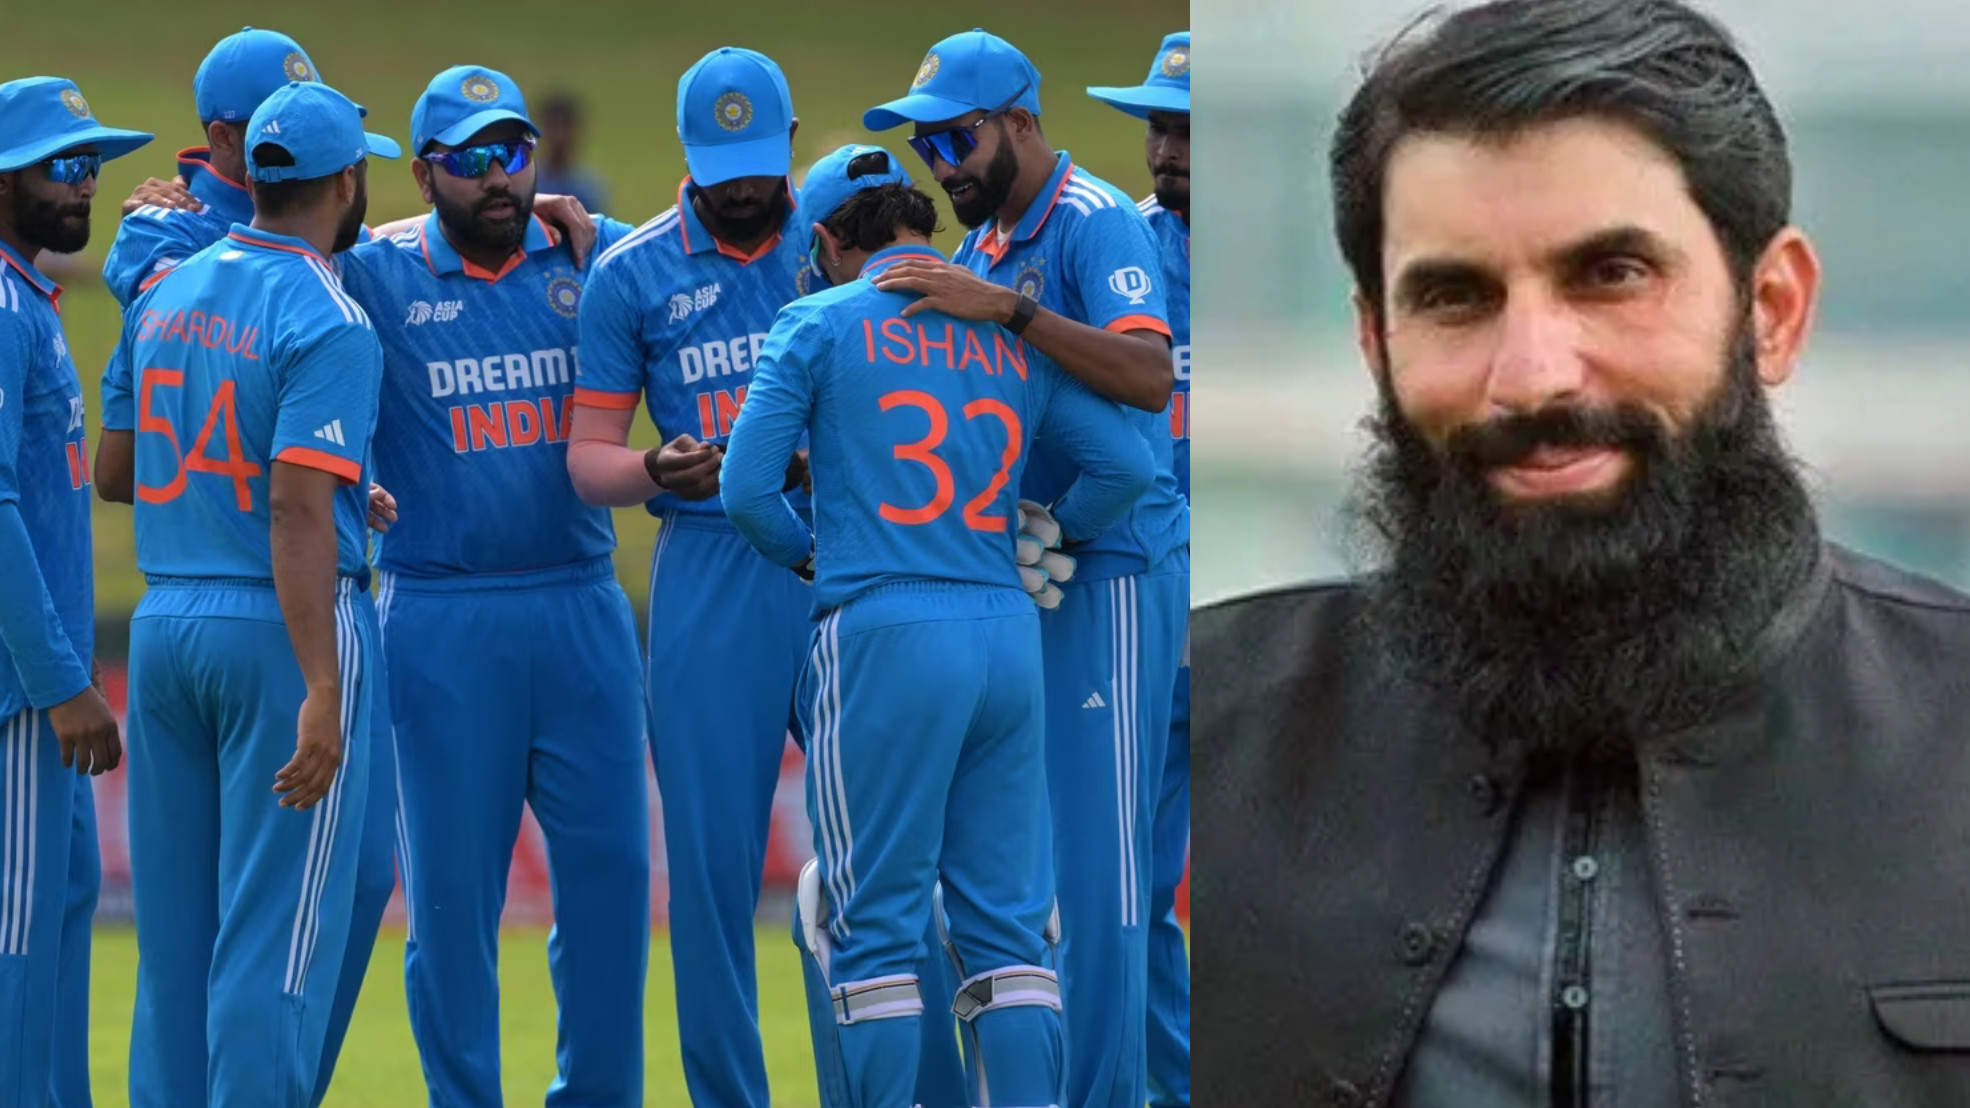 “Intense pressure from public a major challenge”- Misbah Ul Haq on why India is not winning ICC titles